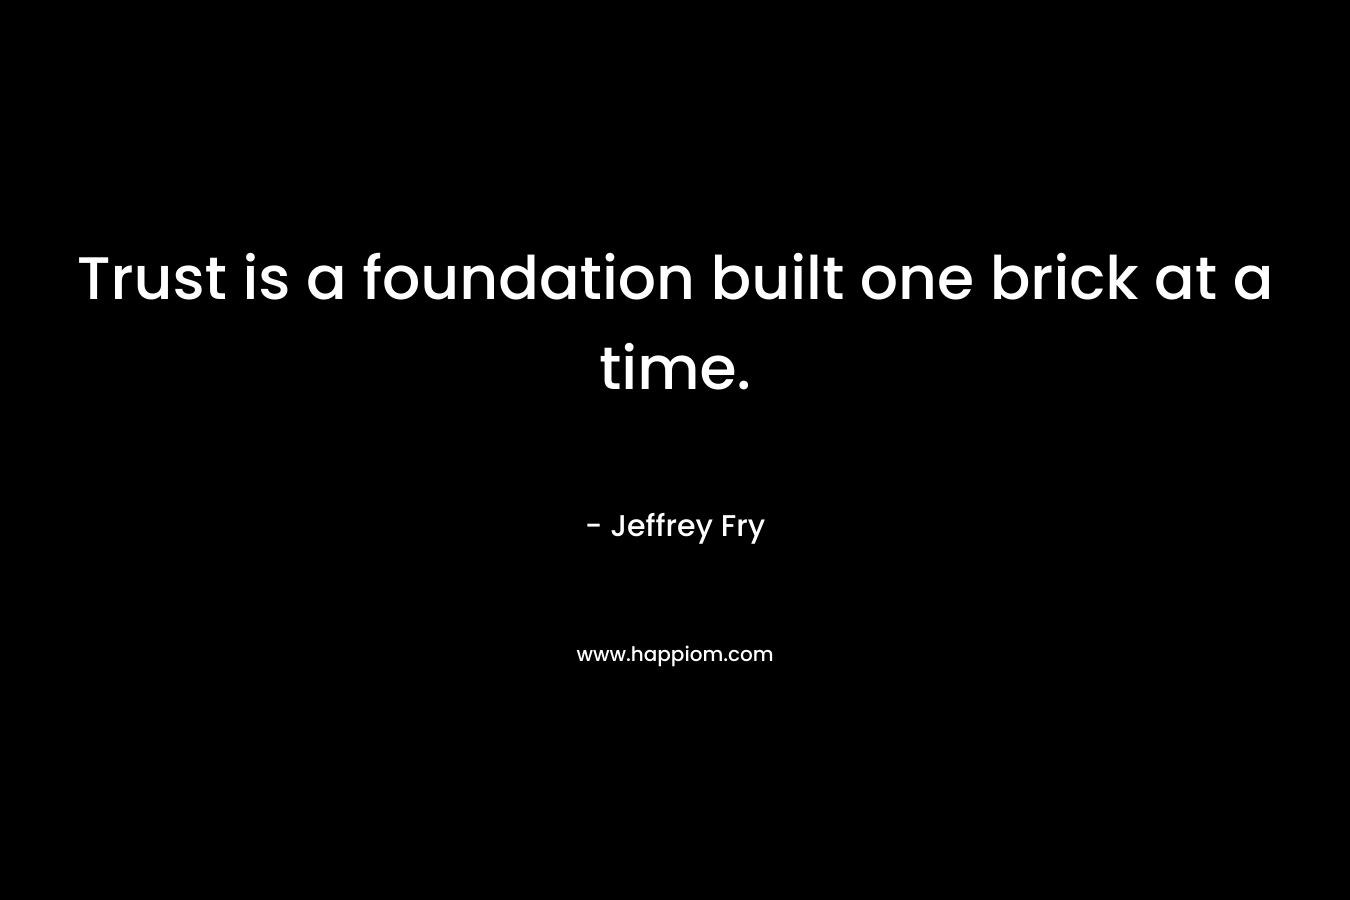 Trust is a foundation built one brick at a time. – Jeffrey Fry